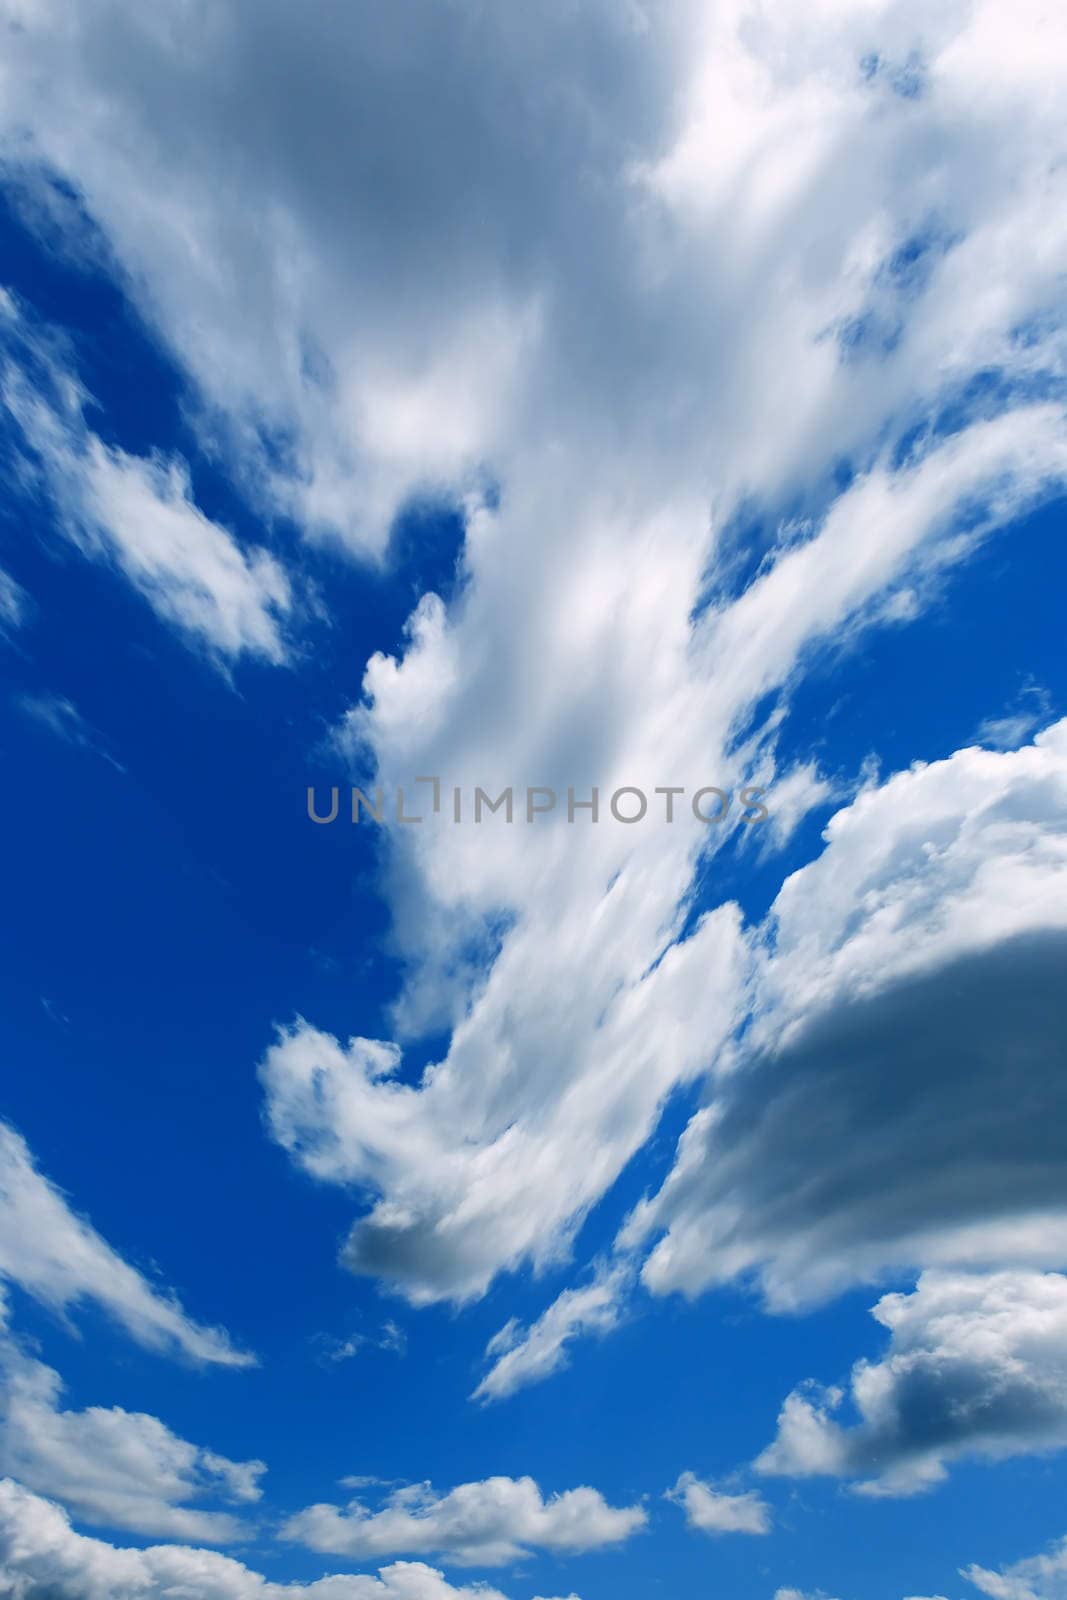 Nice background with blue sky and storm clouds